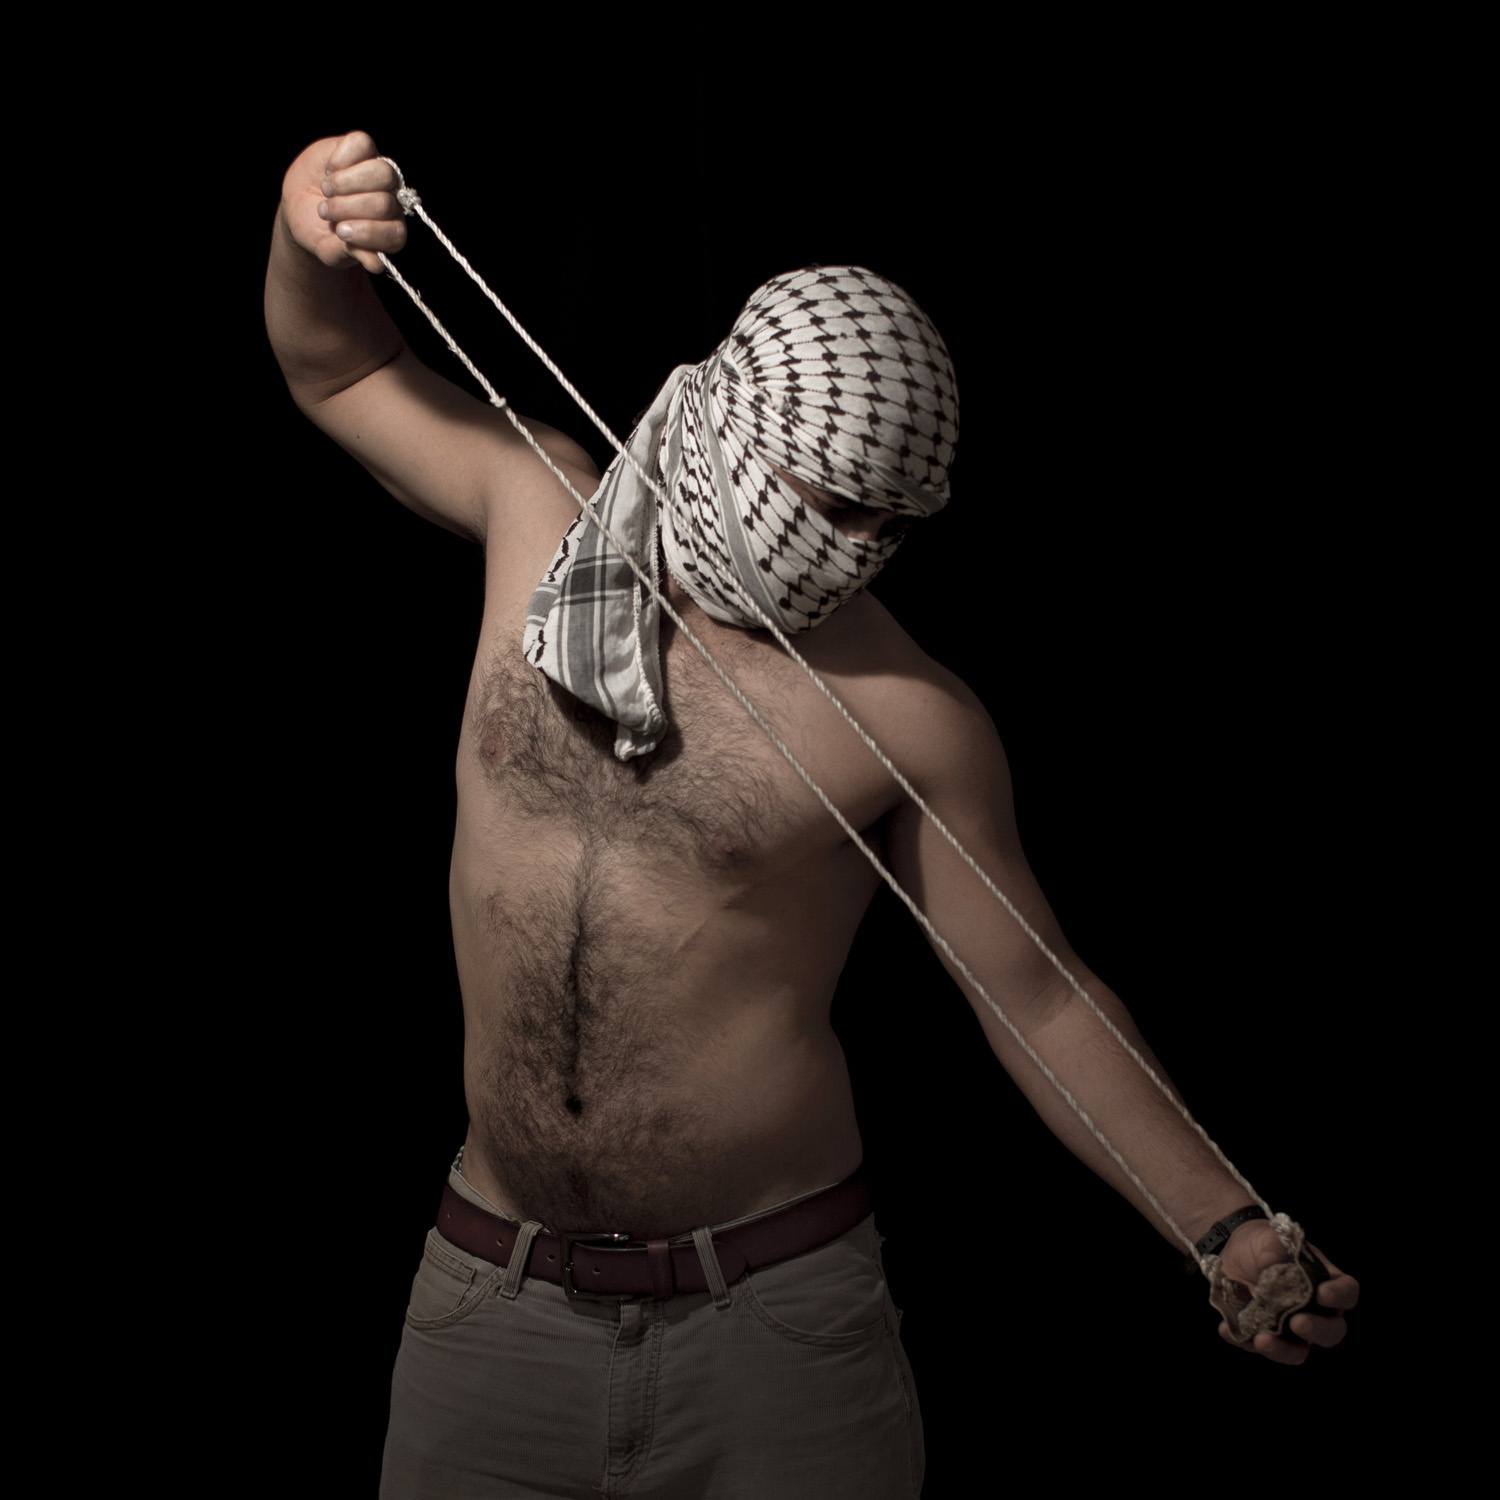 Portrait of a Palestinian stone thrower in the West Bank village of Bilin, near Ramallah. June 13, 2012.